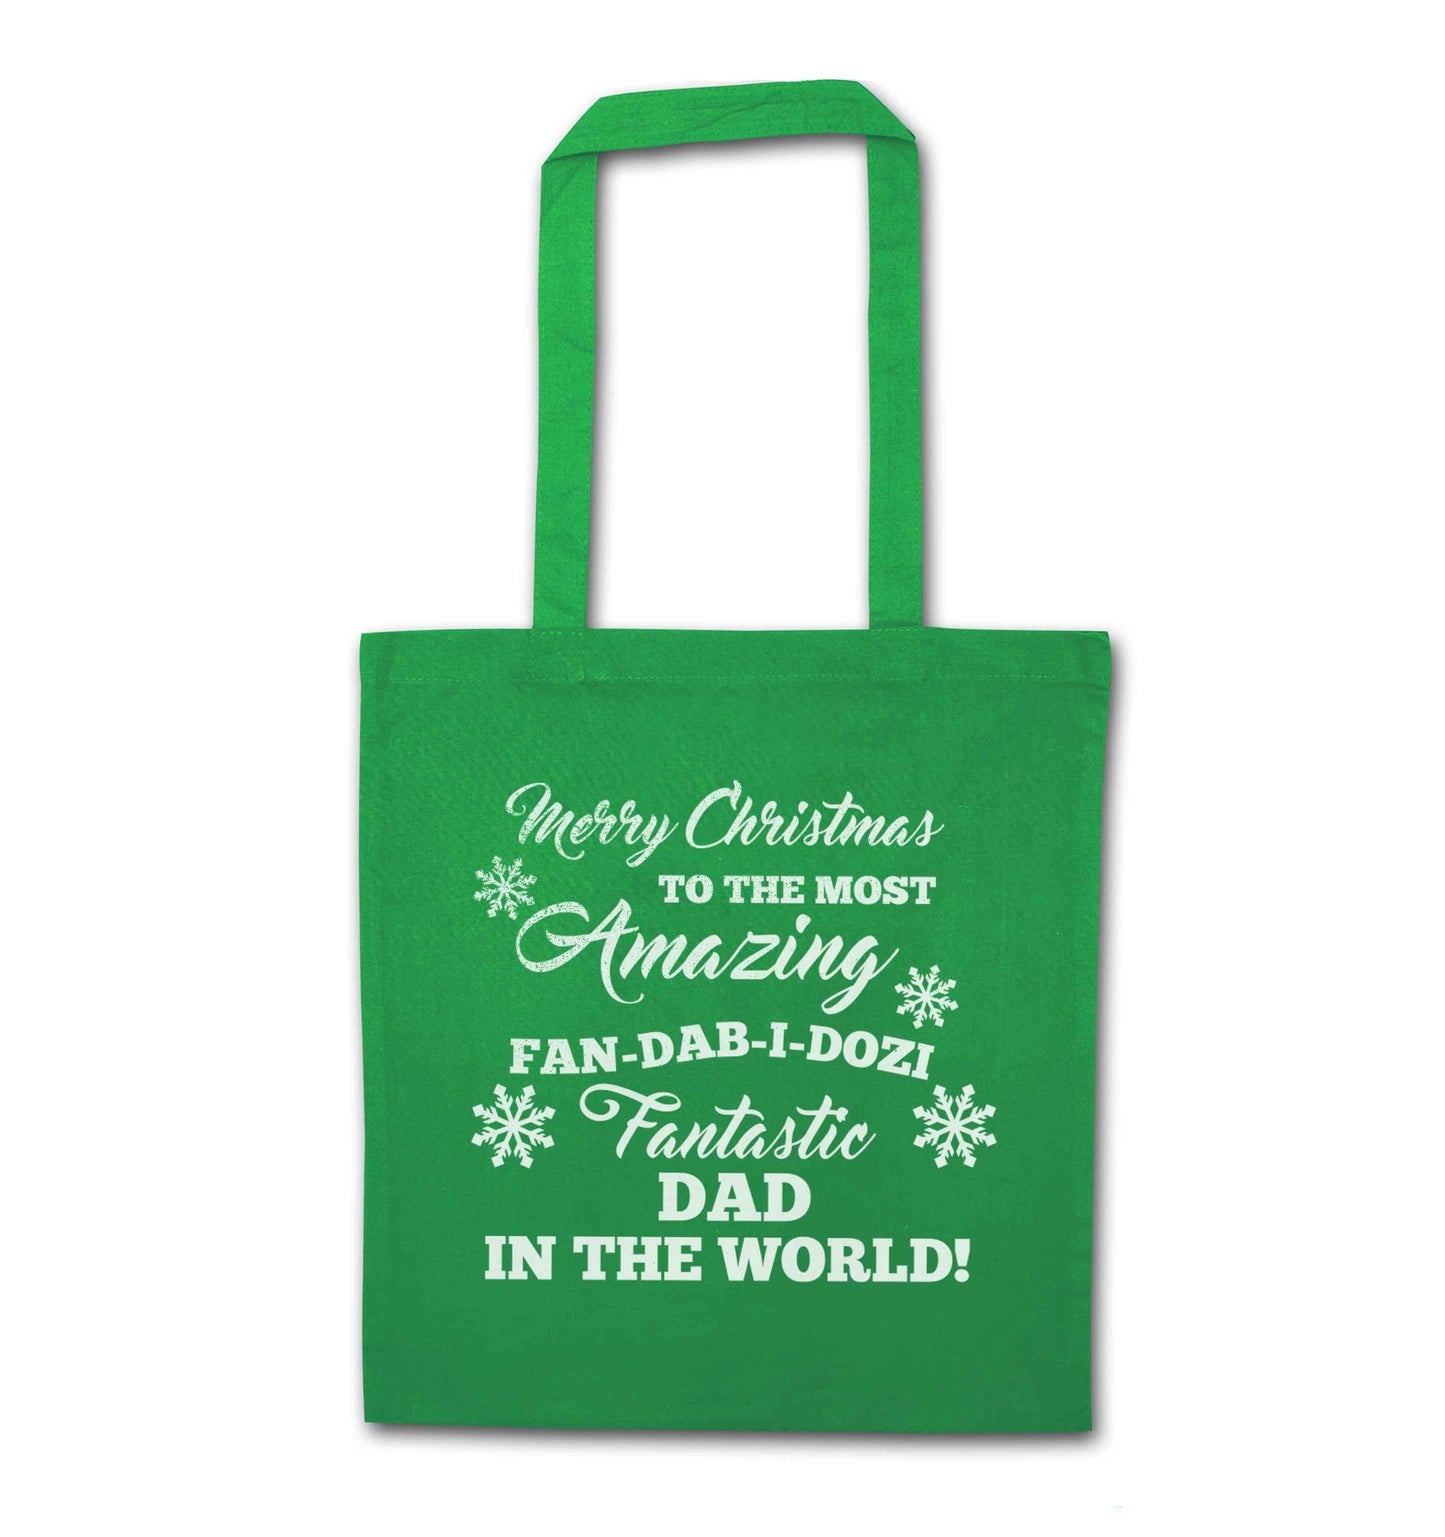 Merry Christmas to the most amazing fan-dab-i-dozi fantasic Dad in the world green tote bag